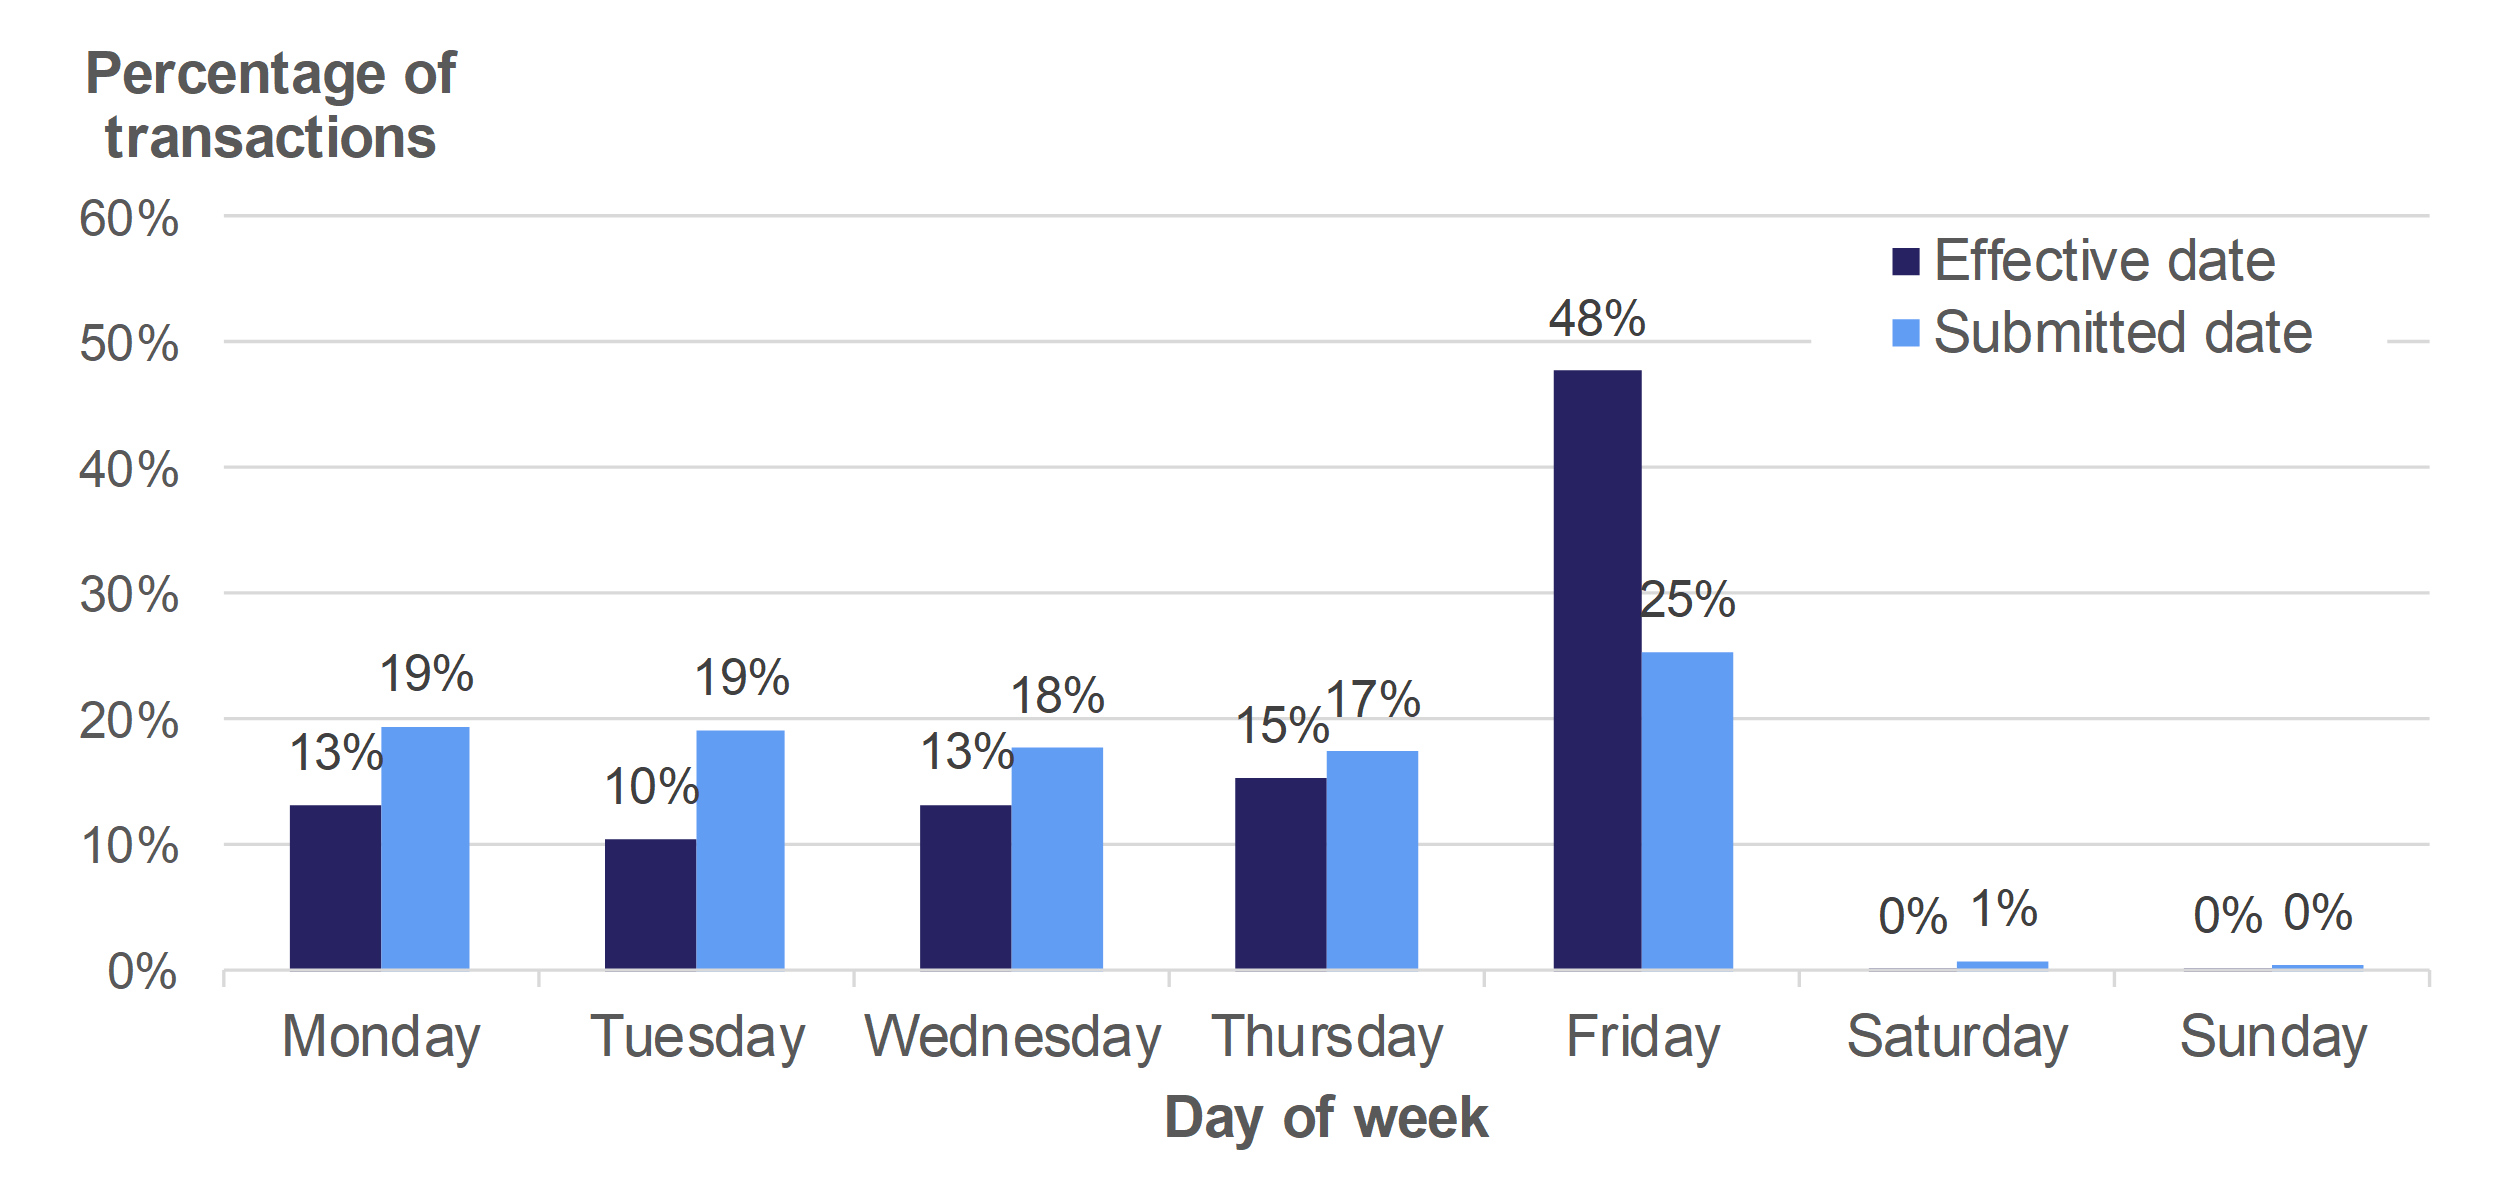 Figure 10.8 shows the percentage of transactions which became effective and which were submitted on the different days of the week. The data relates to transactions which were effective in April 2018 to March 2019, and transactions submitted to the WRA between April 2018 and March 2019.